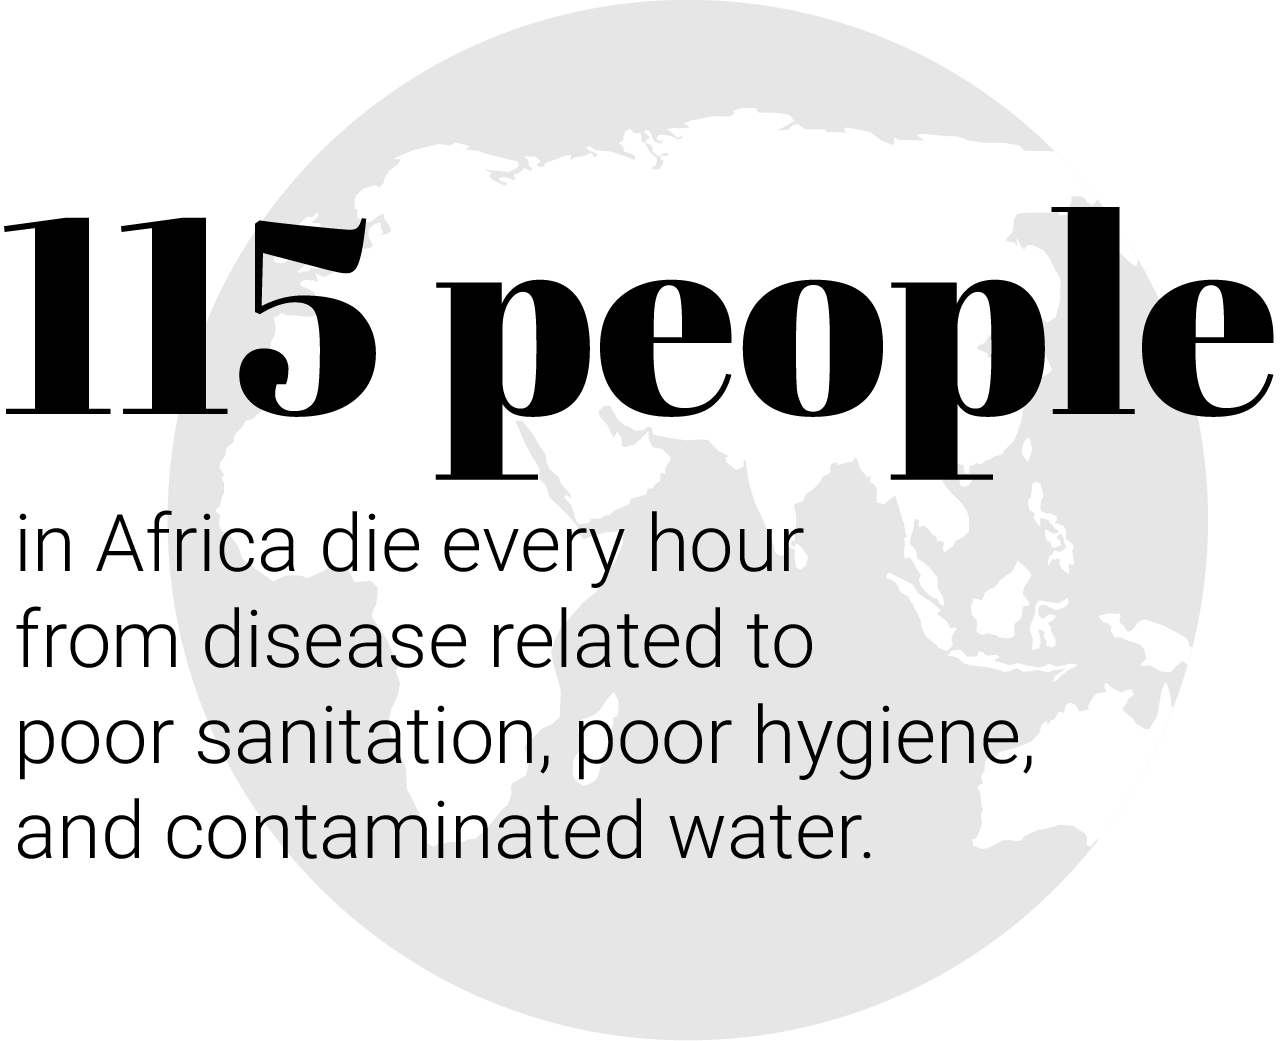 According to Global Citizen, “115 people in Africa die every hour from disease related to poor sanitation, poor hygiene, and contaminated water.”